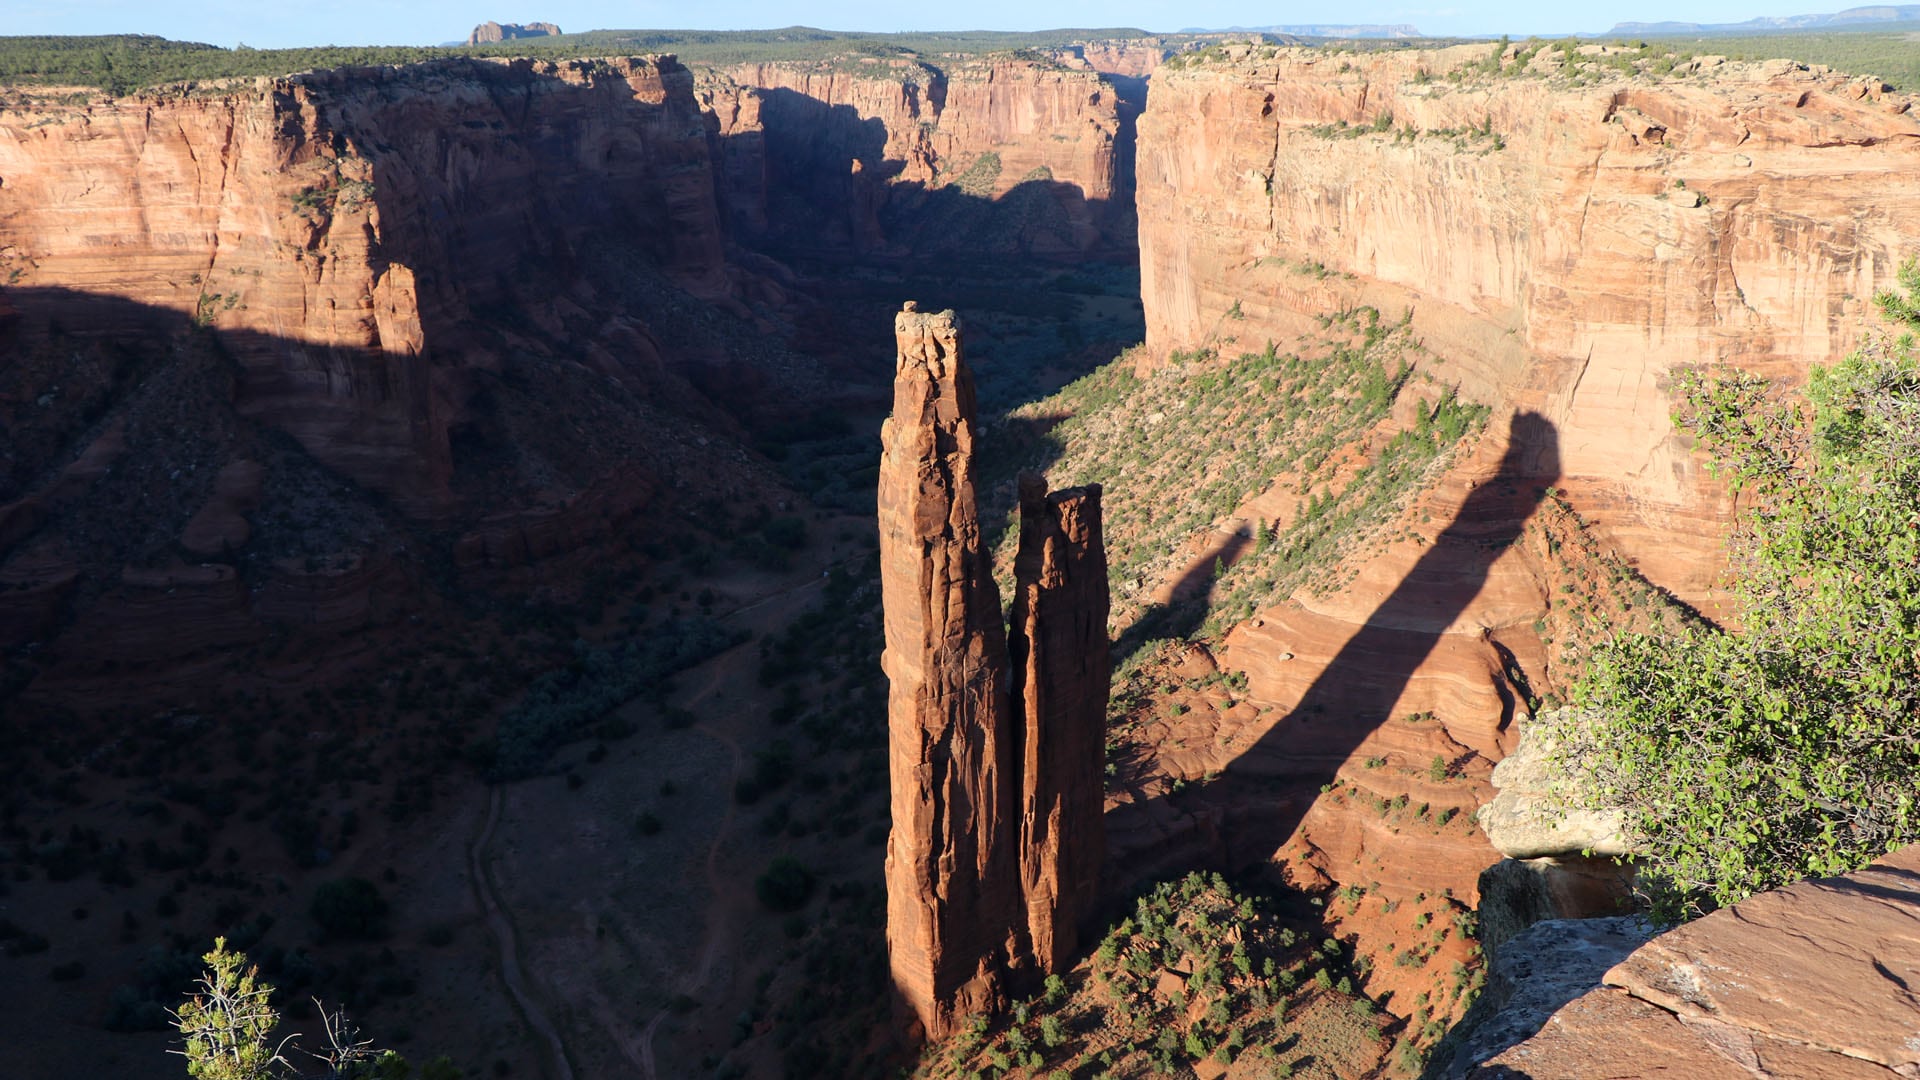 Road Trip to Canyon de Chelly National Monument